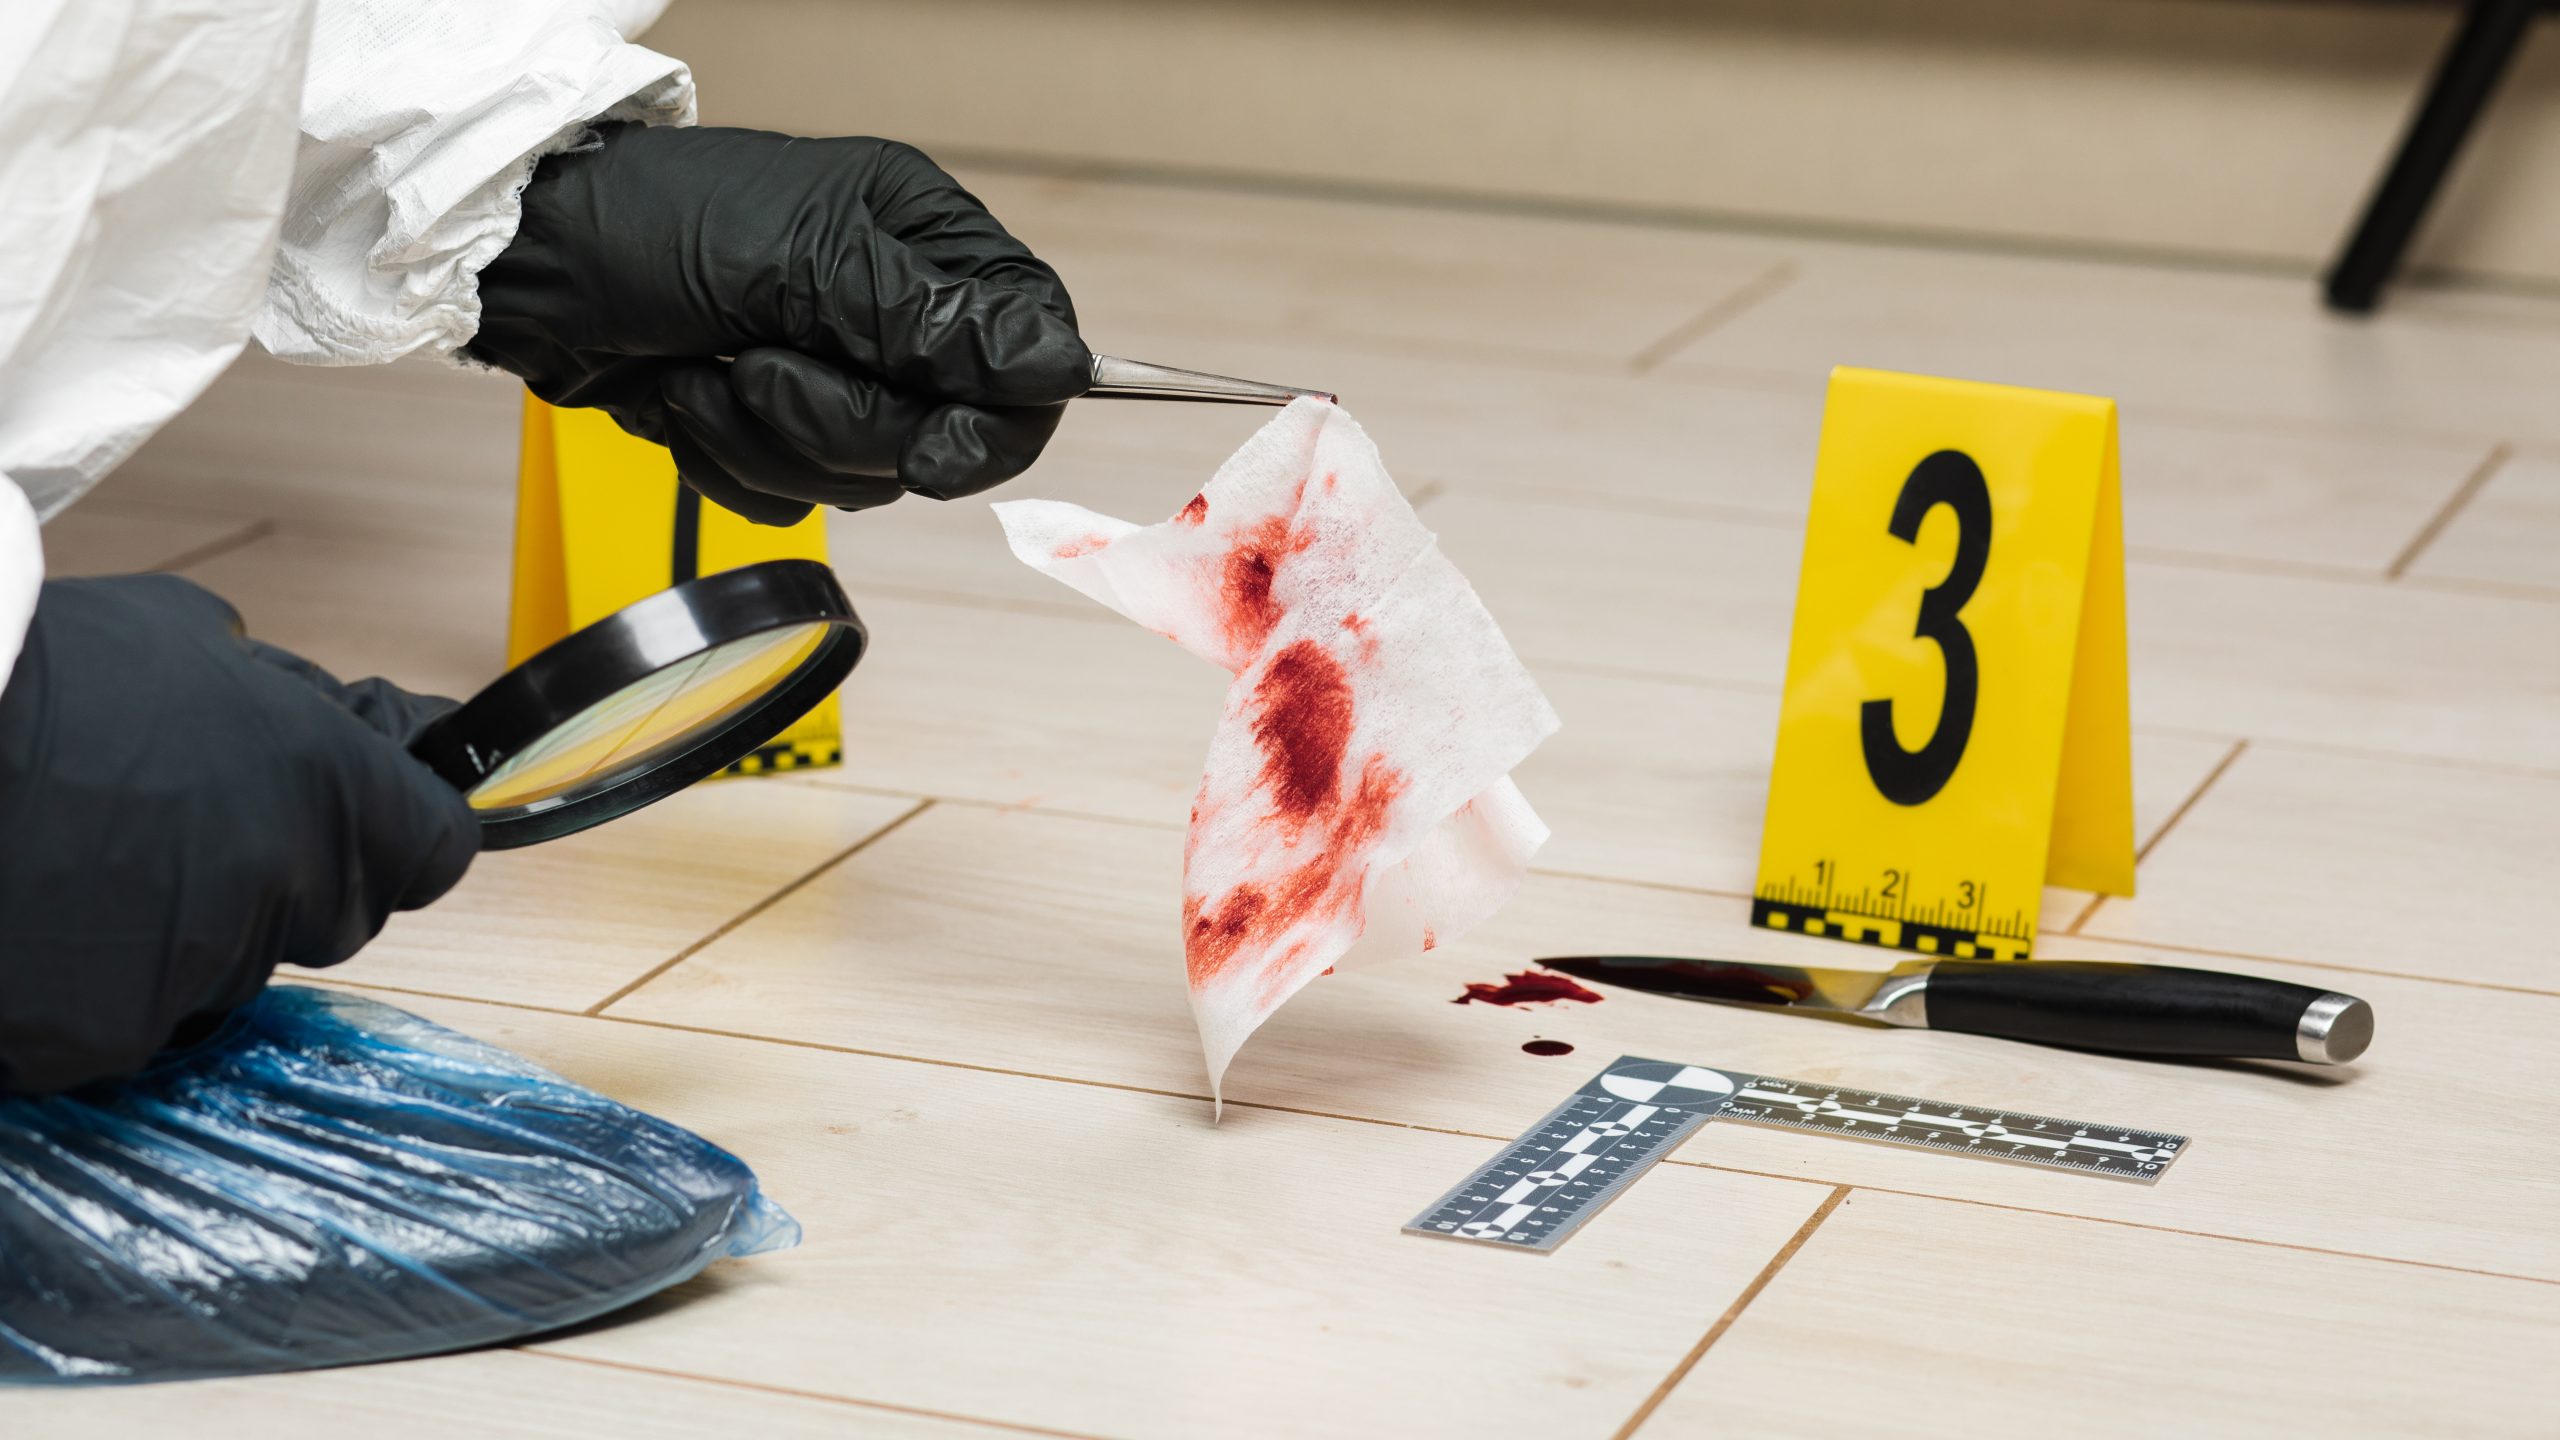 Bloodstain Pattern Analysis (Experiment)